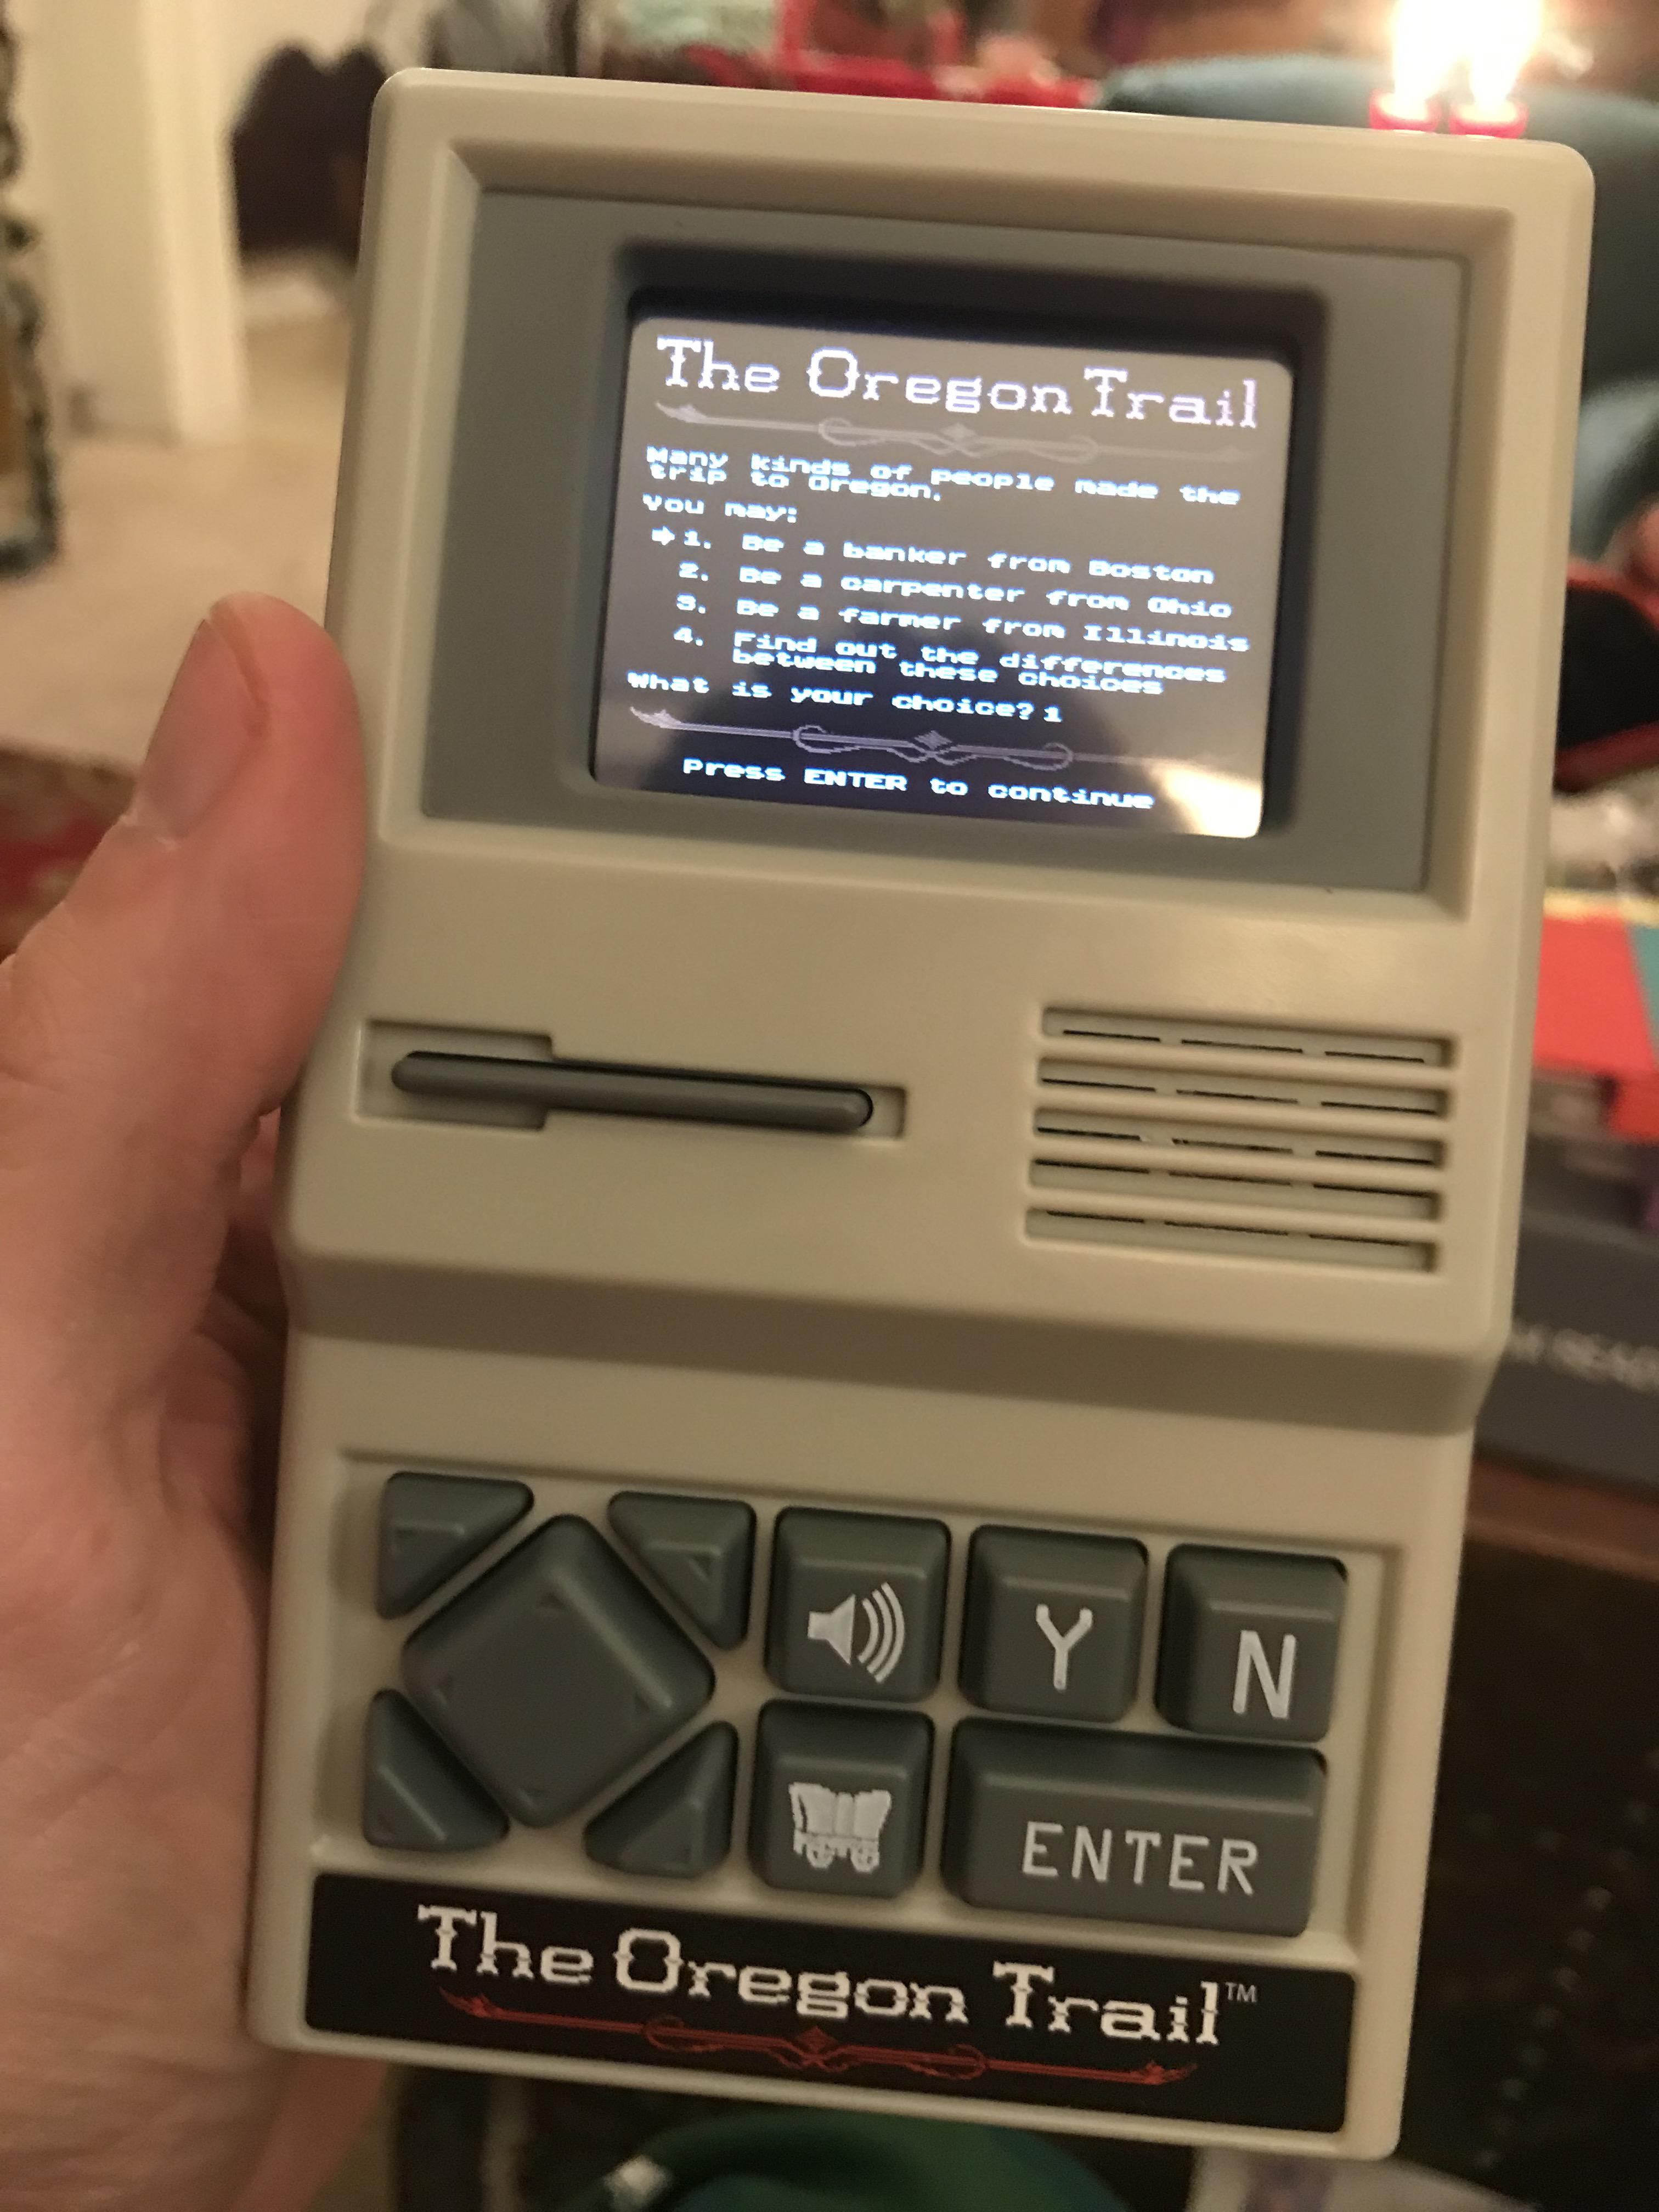 I can't wait to catch 8-bit dysentery...